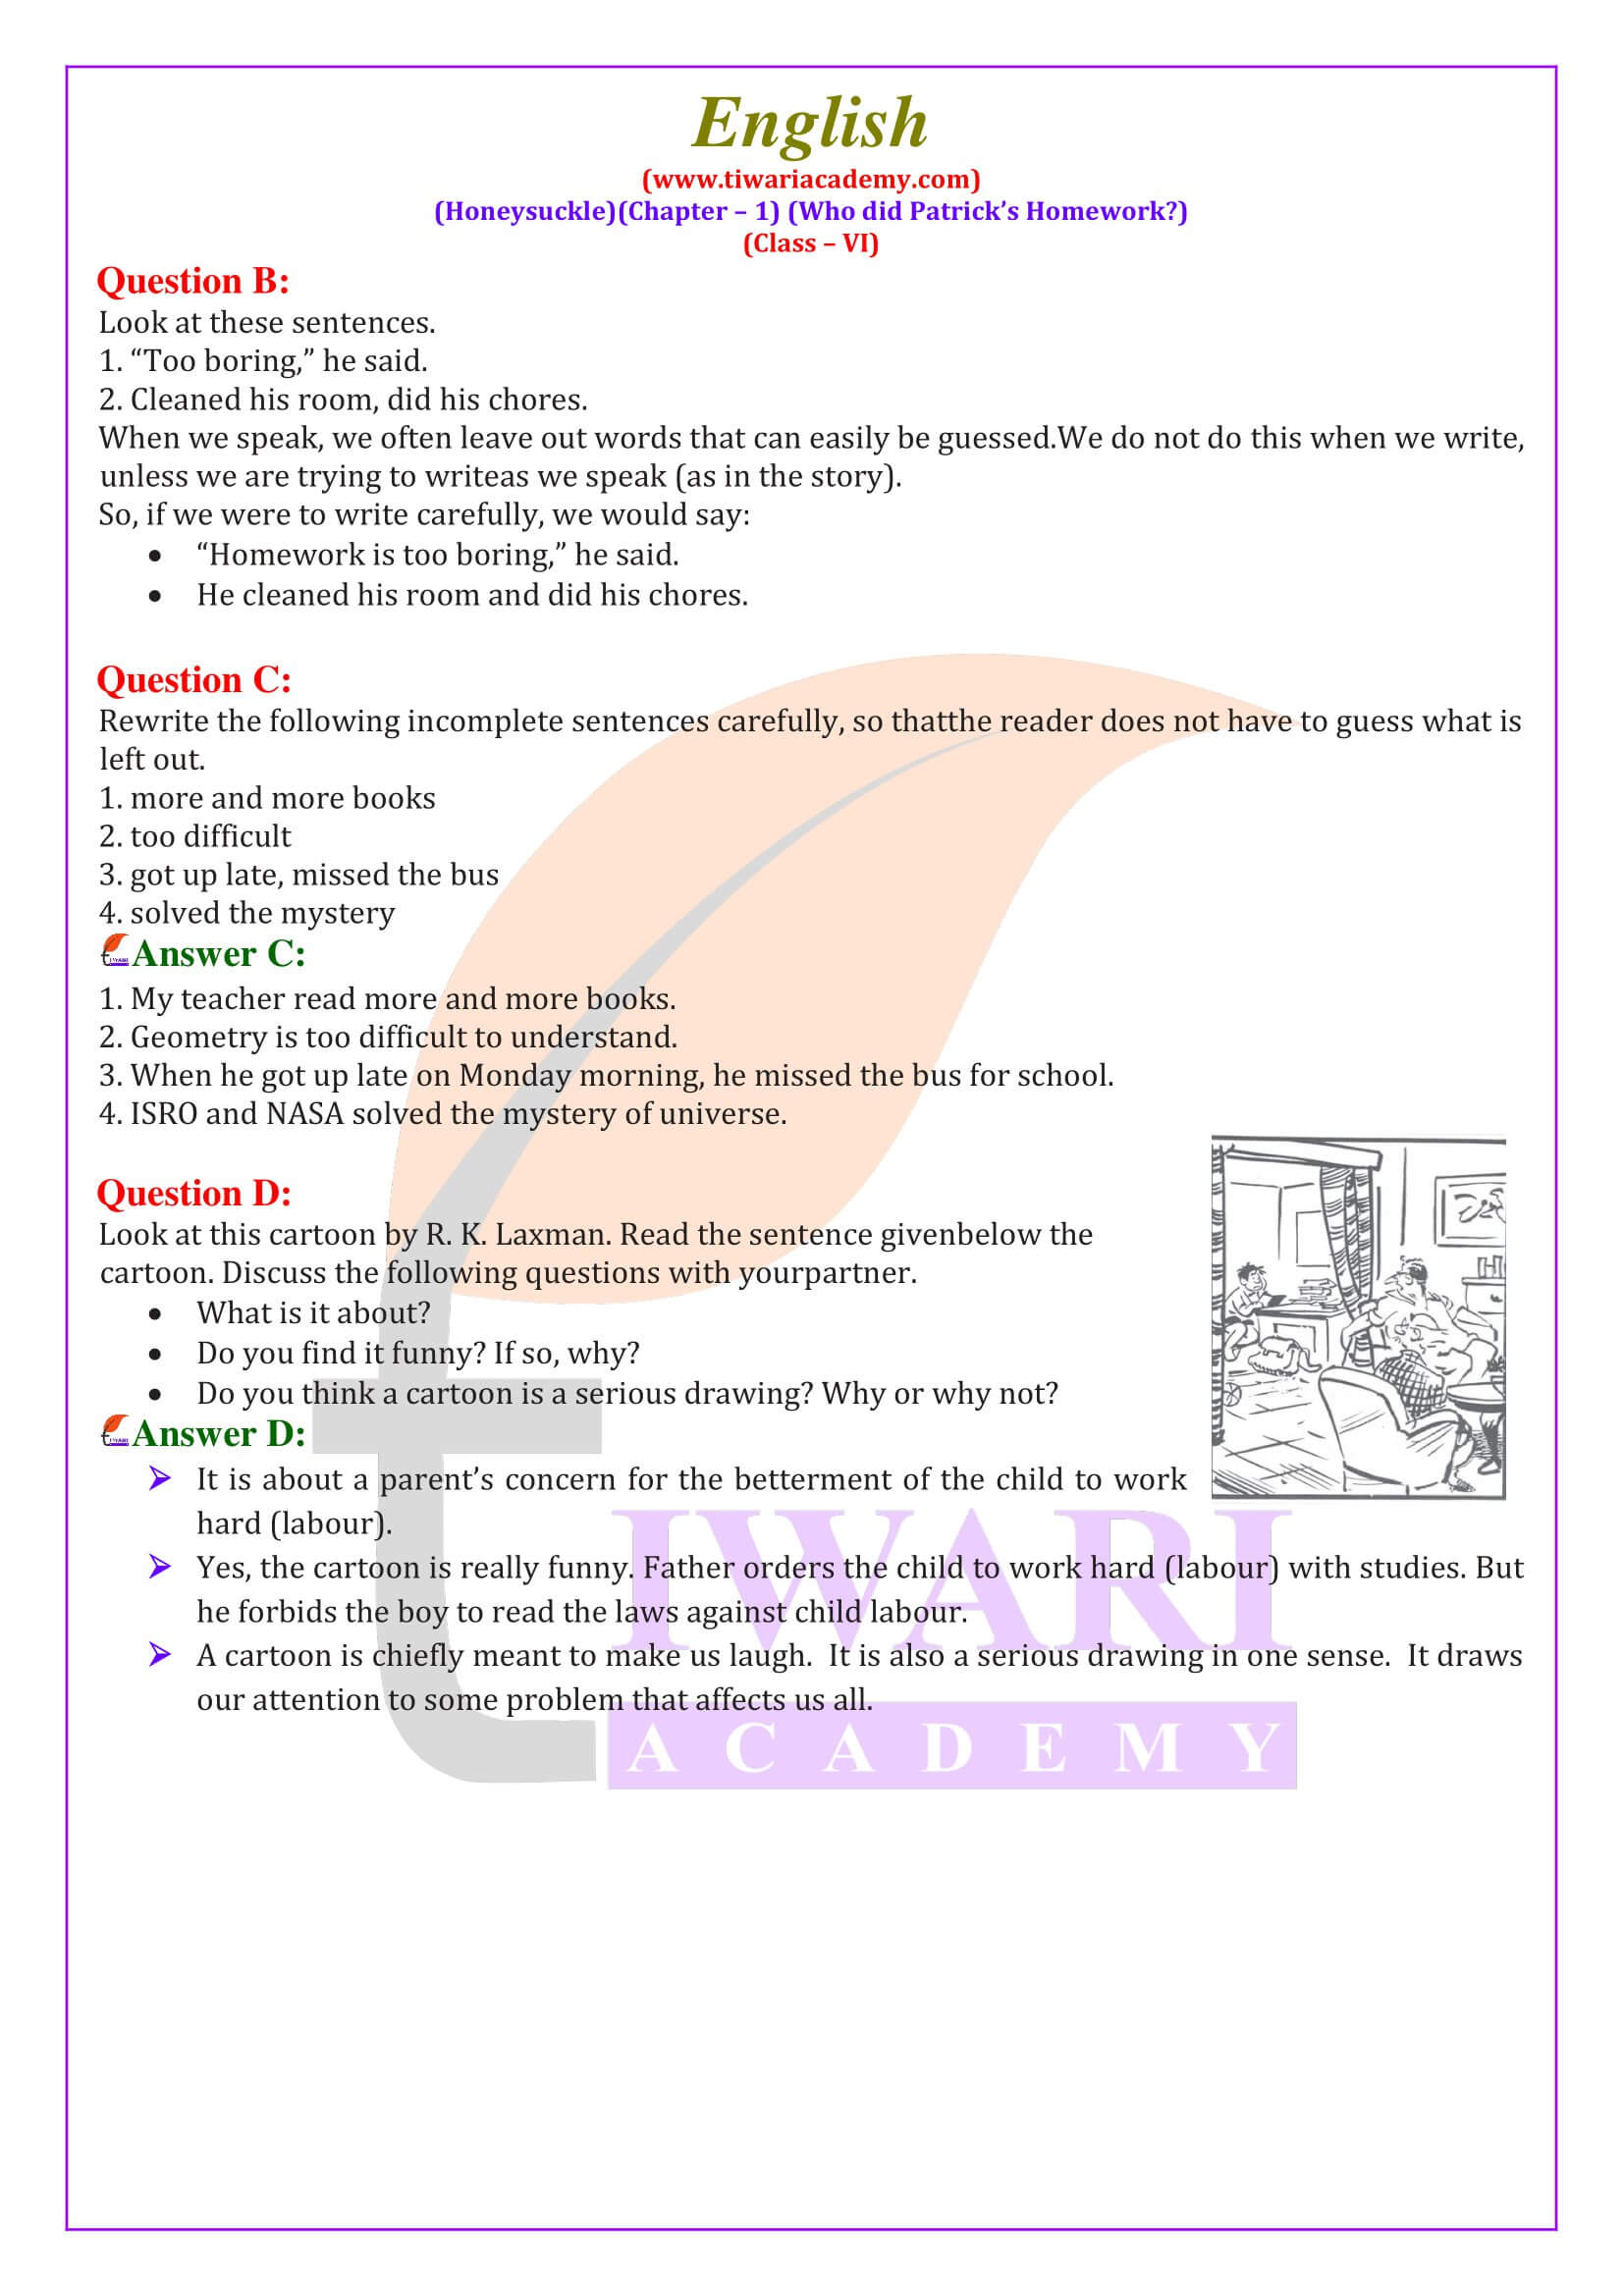 Class 6 English Chapter 1 Questions Answers